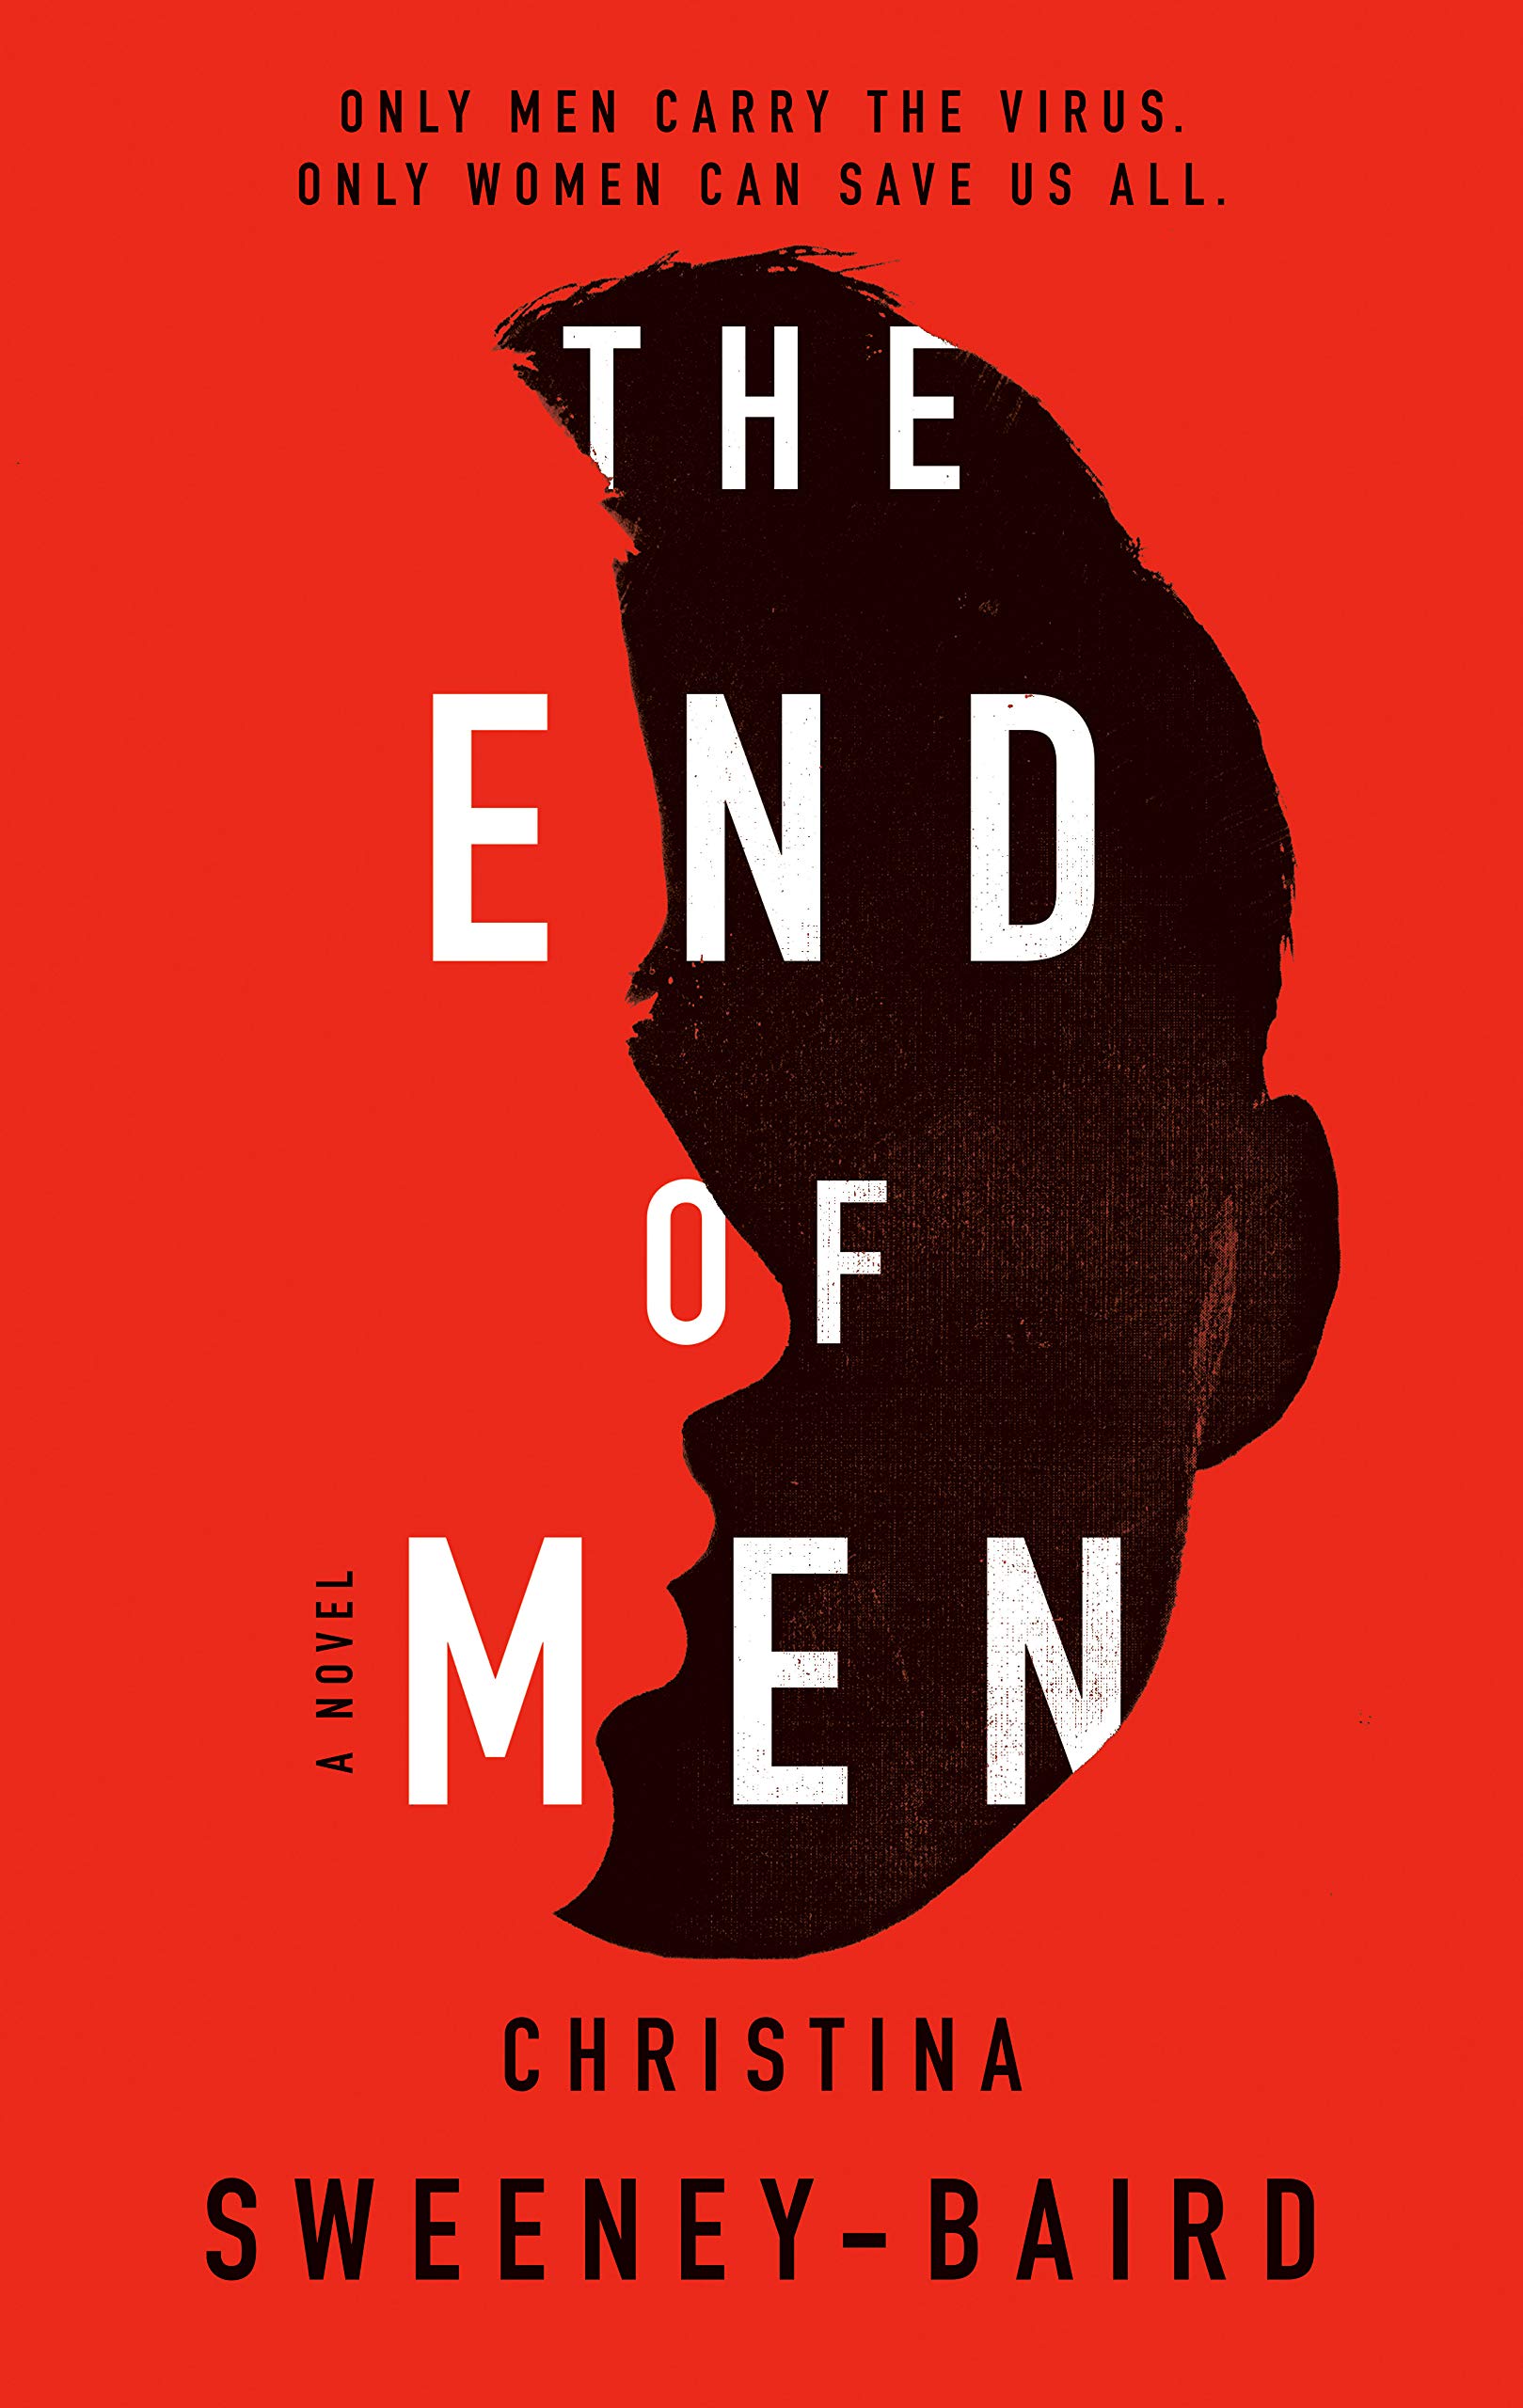 A red book cover with a dark half silhouette of a face and the words "The End of Men" in white. 